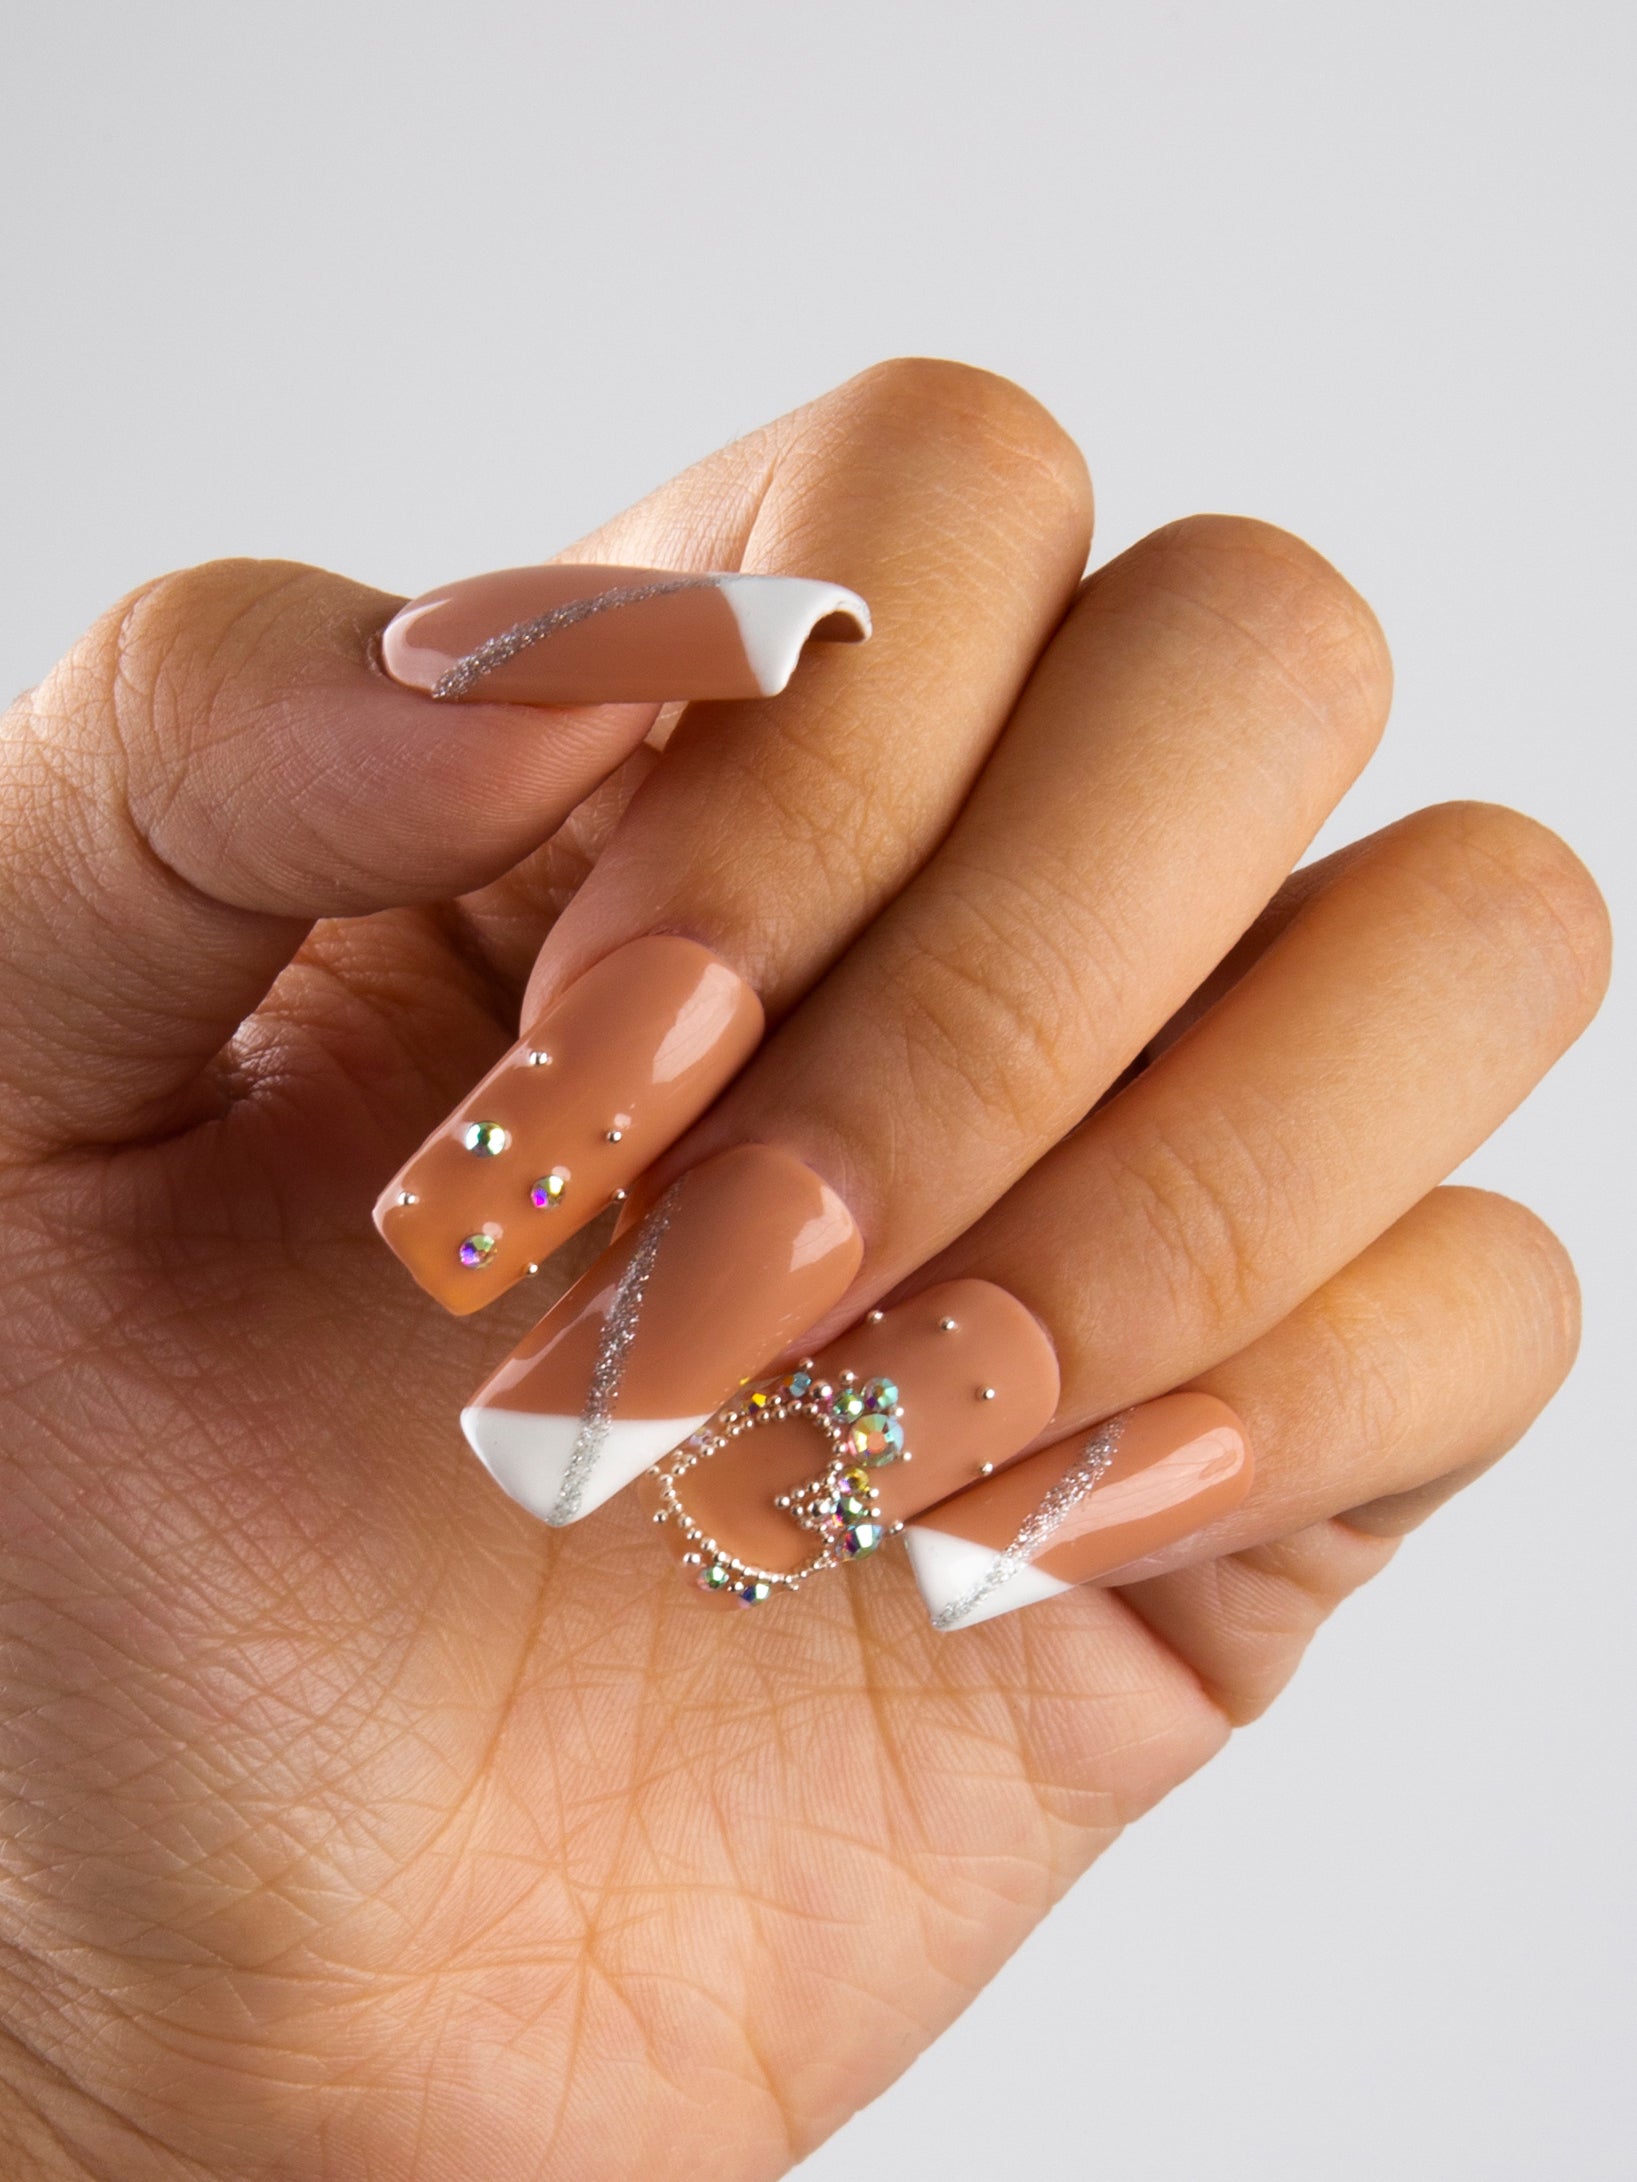 Hand showcasing 'Lovely Kitten Heels' press-on acrylic nails with classic French tips, glitter accents, rhinestones, and bow embellishments on a clean white base.